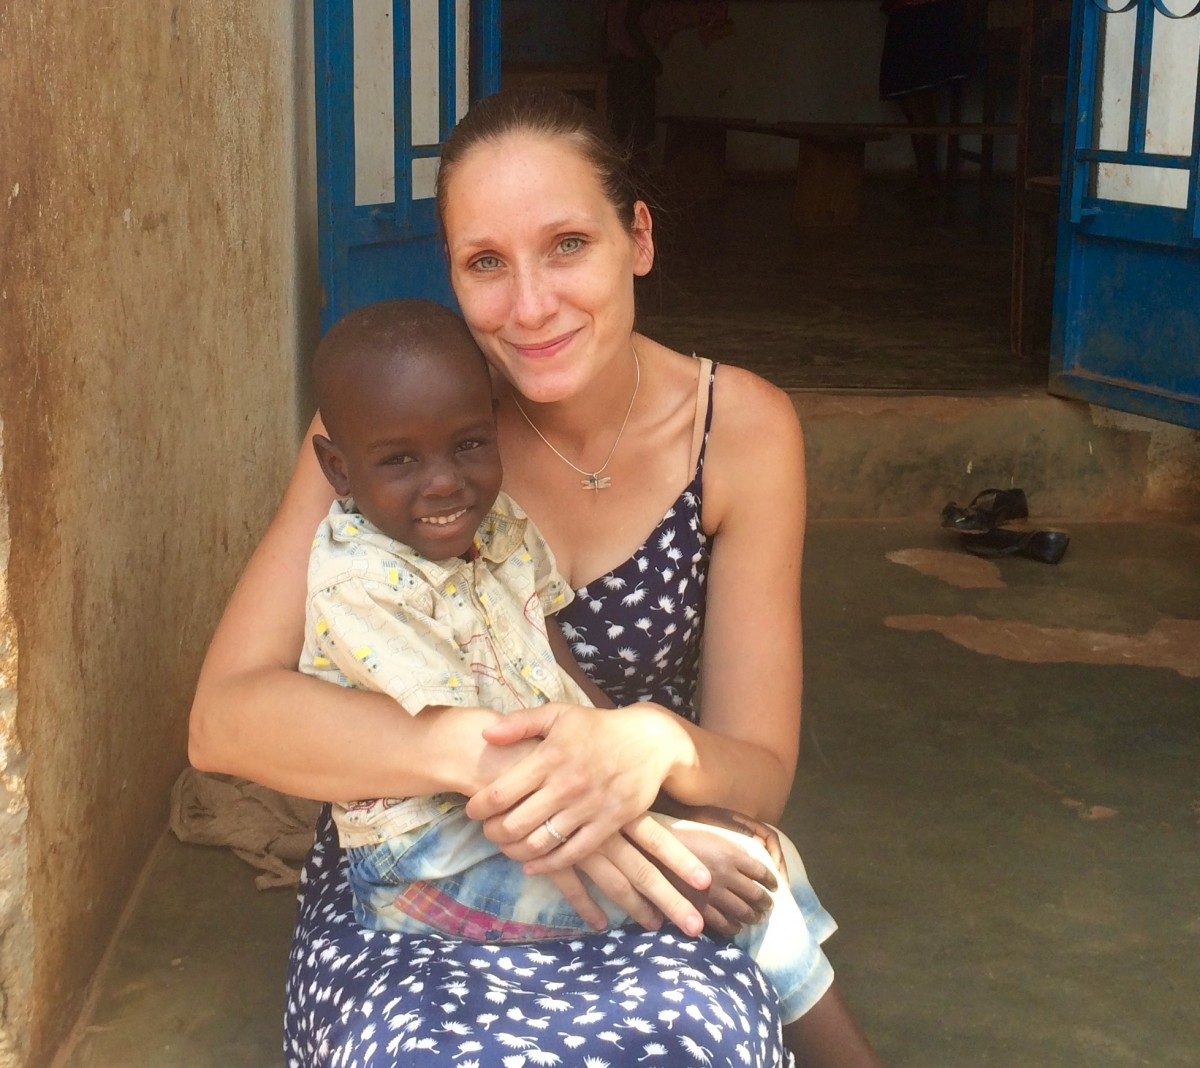 Lindsay Aboud is seated, holding a village boy on her lap in Uganda.